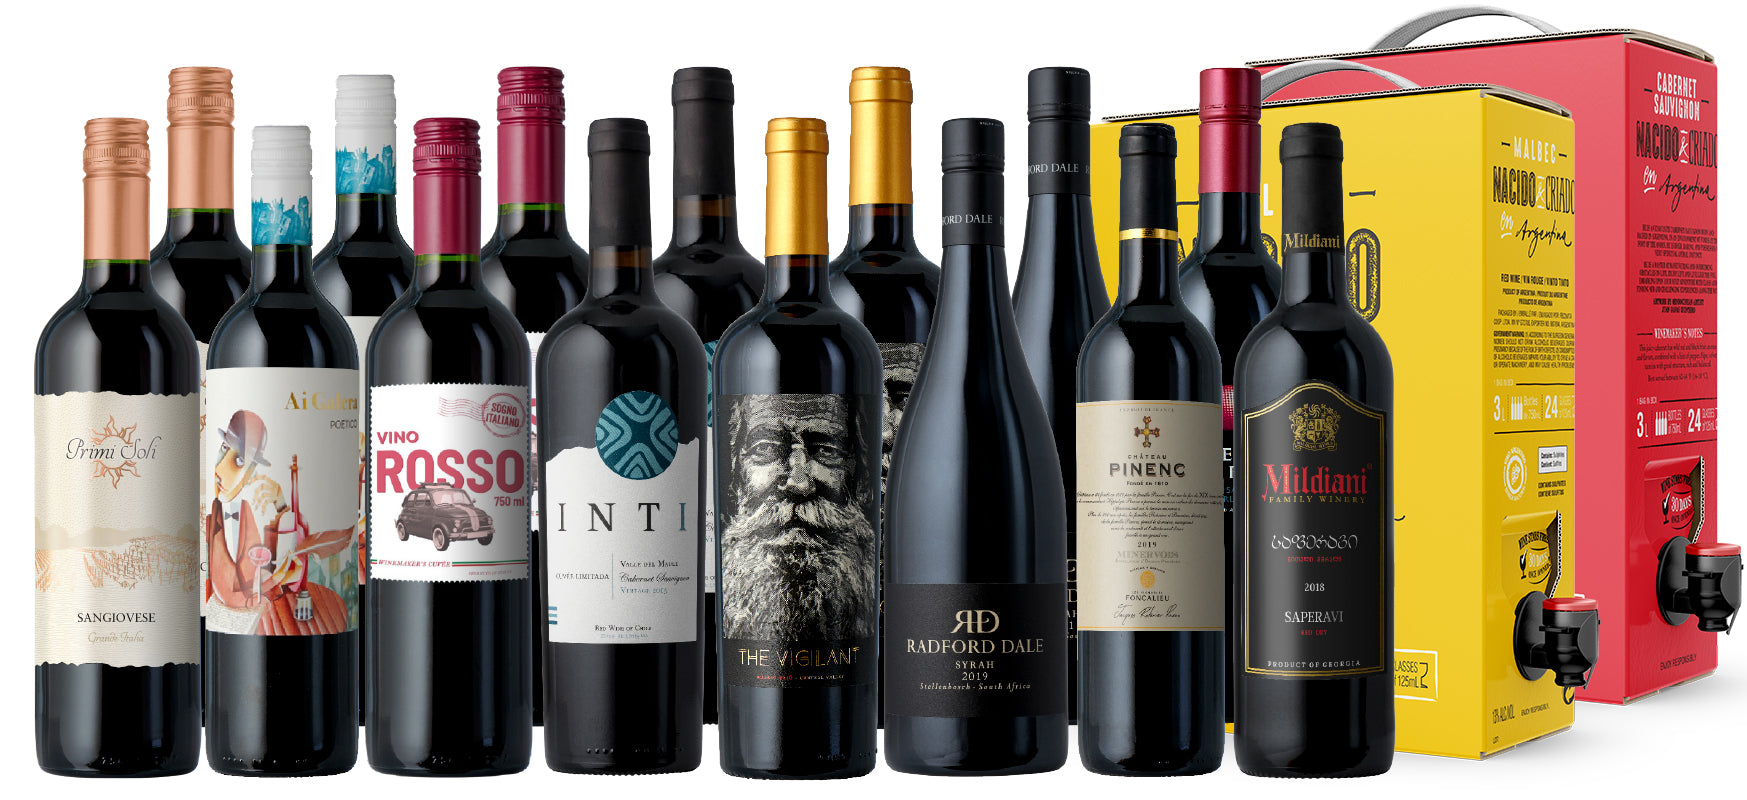 IT'S BACK: Biggest Box Ever- Superstar Red Wines!